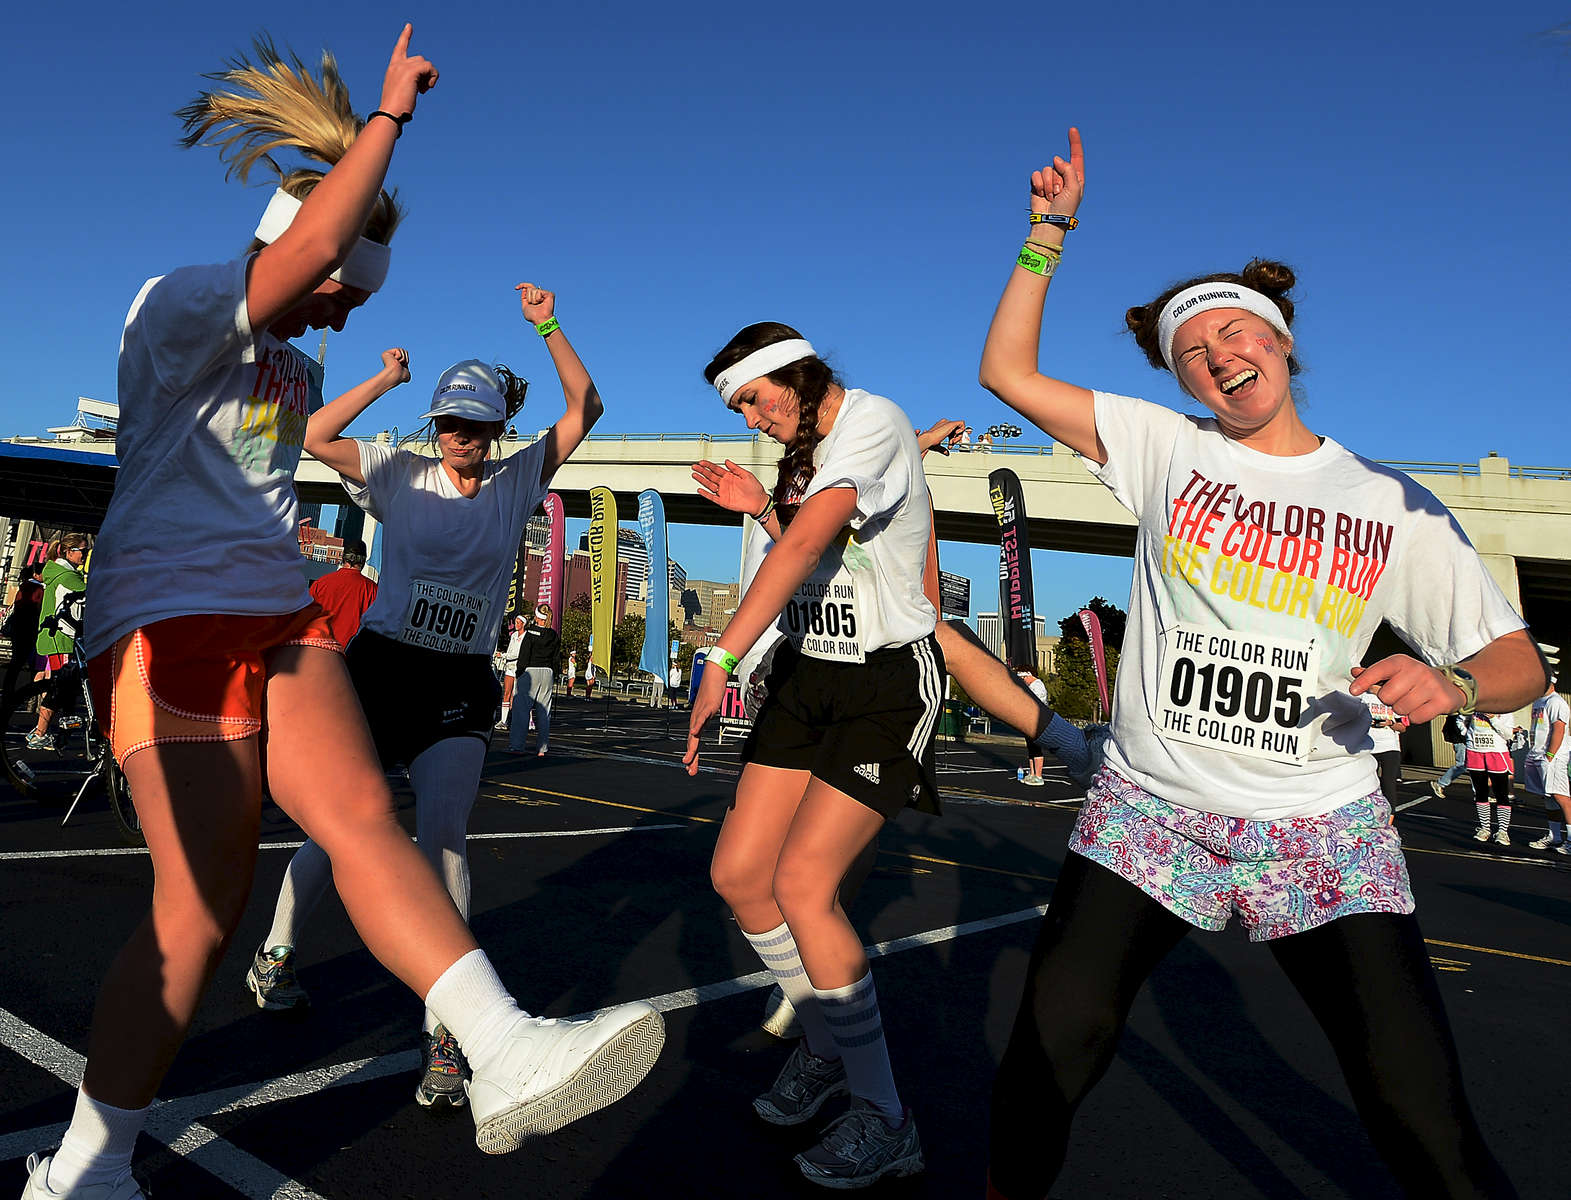 A group of participants dance around listening to music while getting pumped up to compete in the 5K Color Run in Nashville, Tenn. (Mark Zaleski/ For The Tennessean)